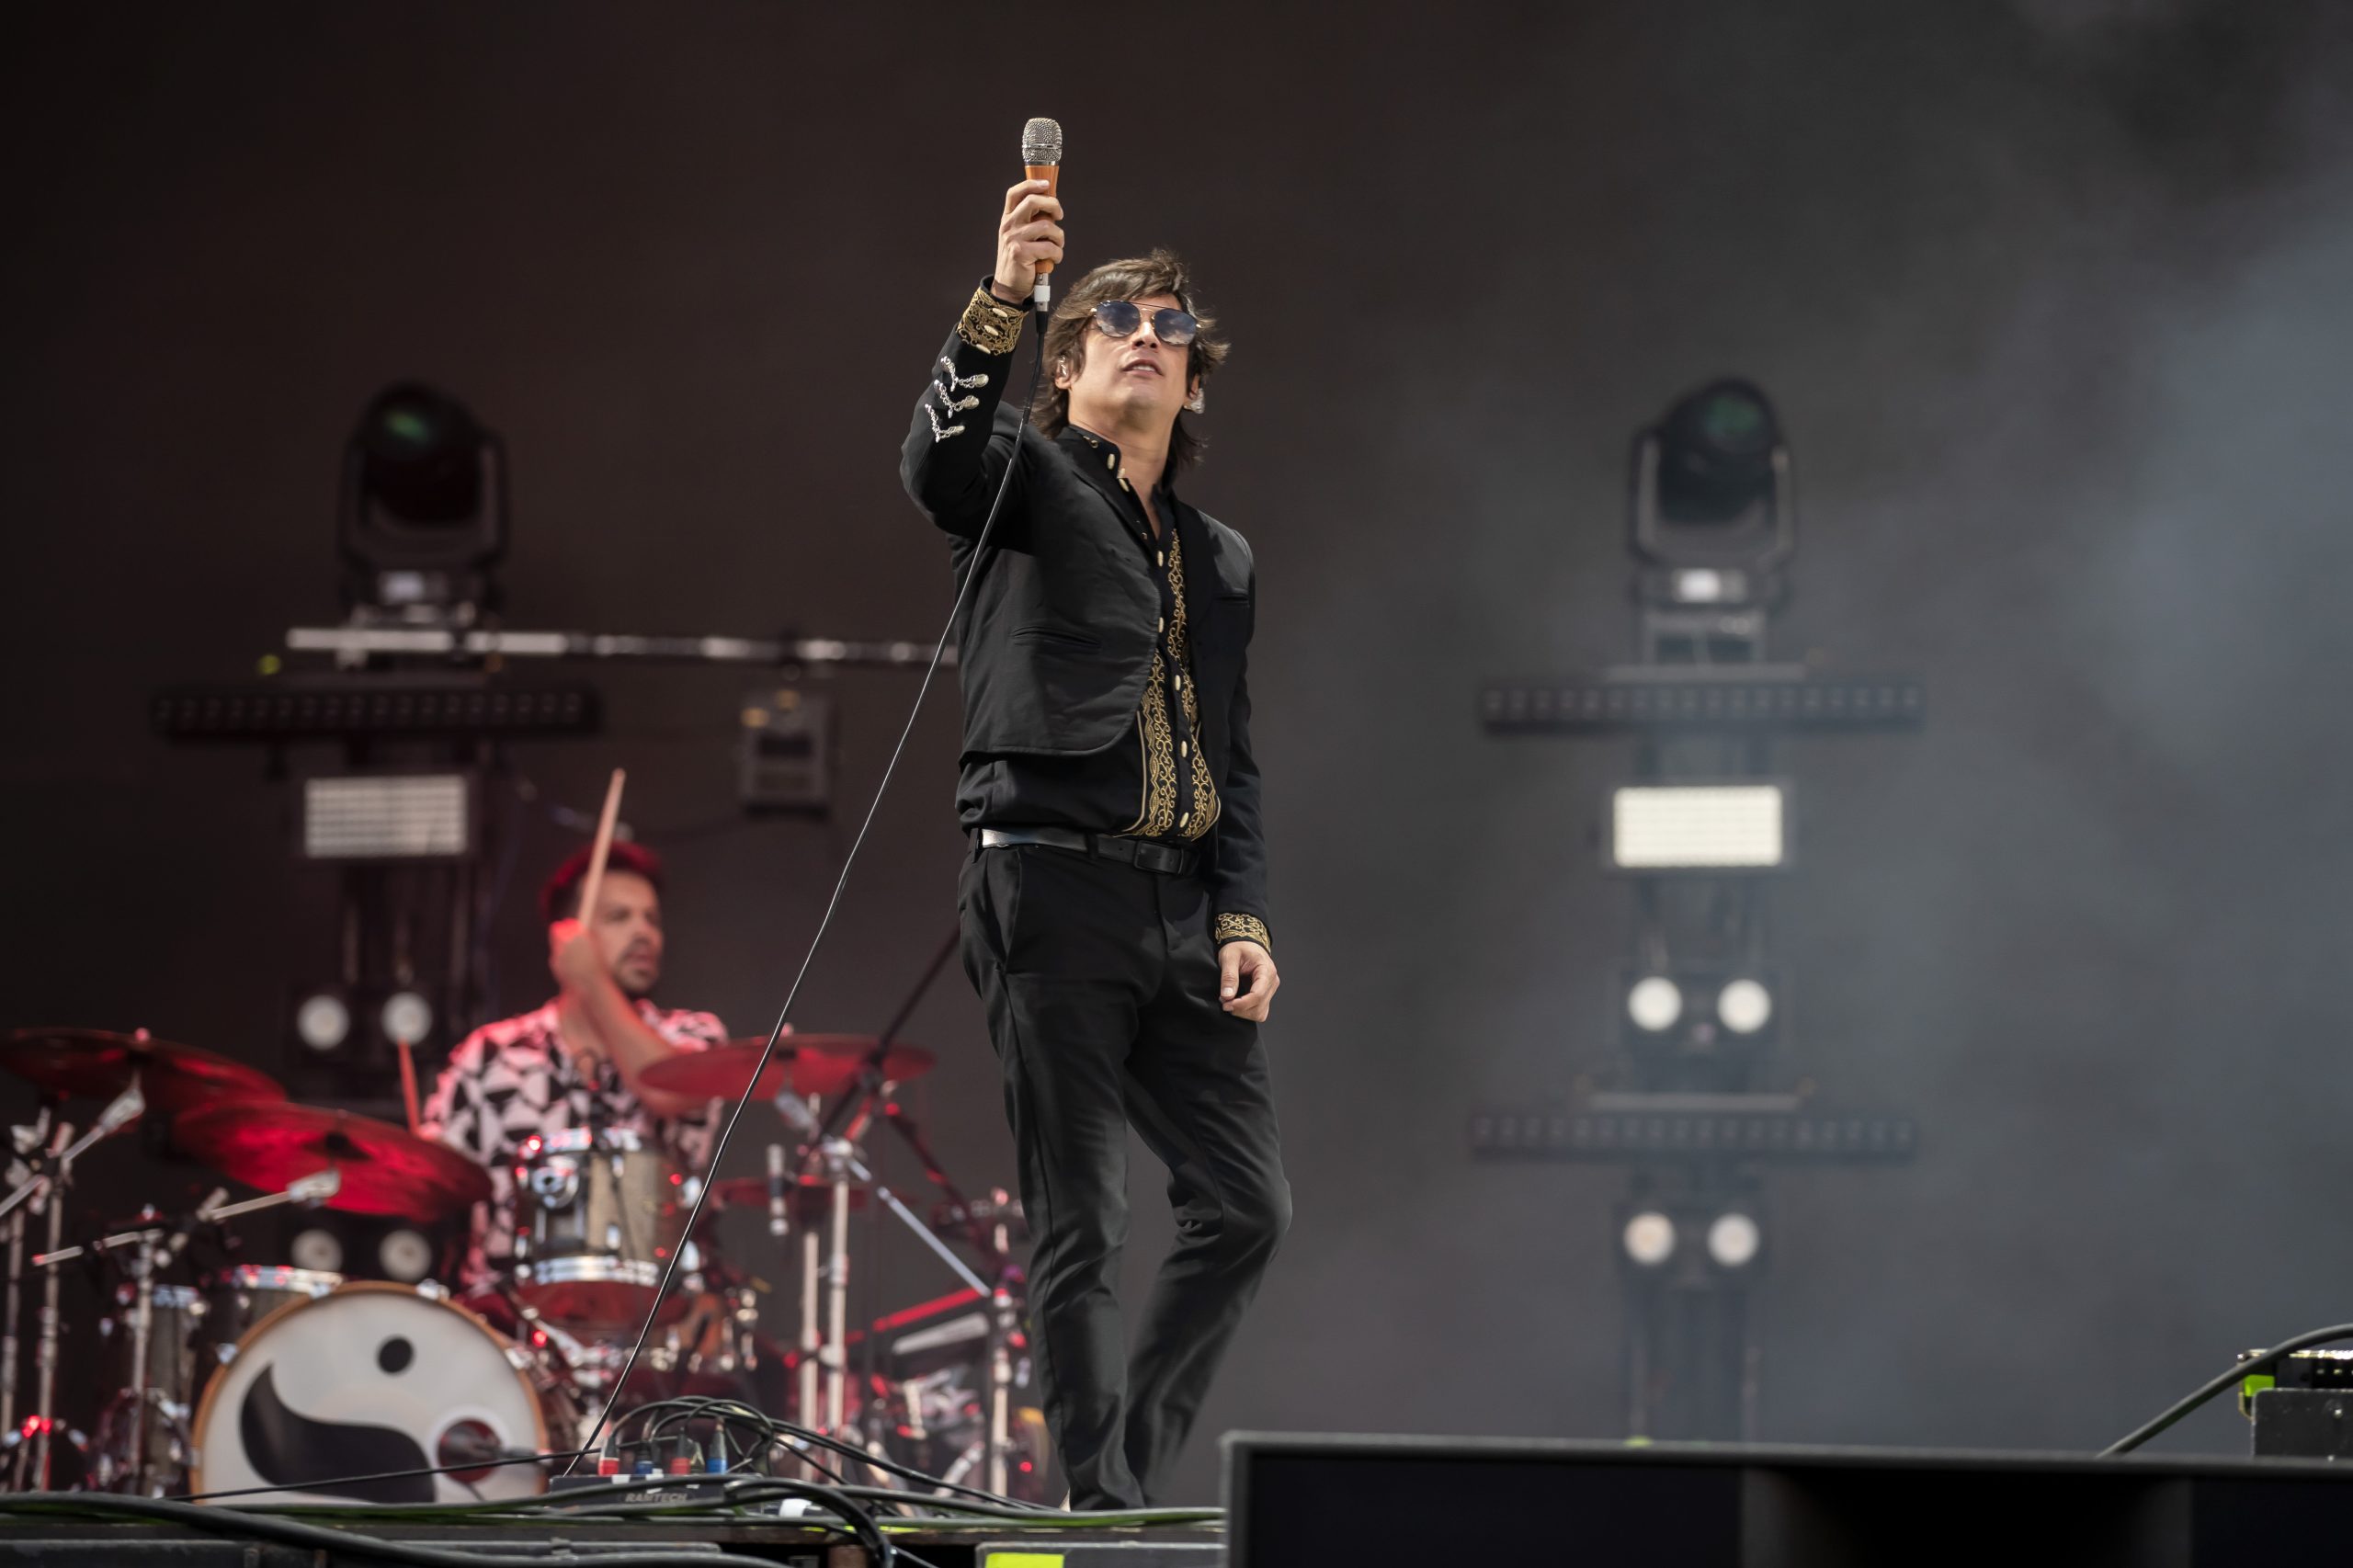 These were the best acts we saw at Vive Latino 2022